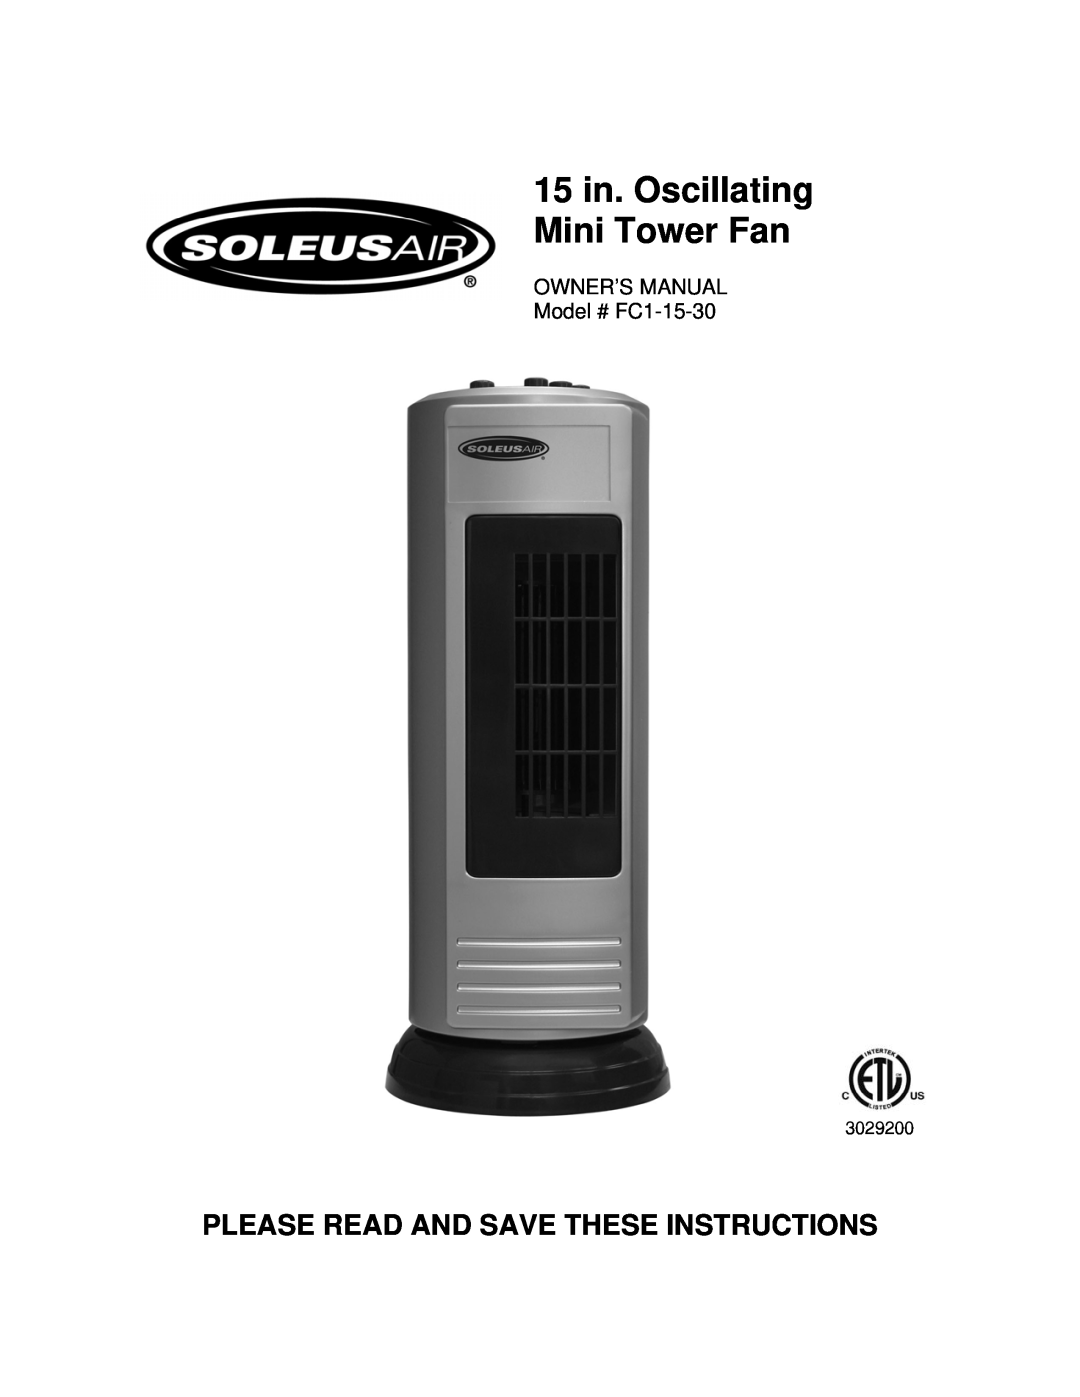 Soleus Air FC1-15-30 owner manual 15 in. Oscillating Mini Tower Fan, Please Read And Save These Instructions, 3029200 